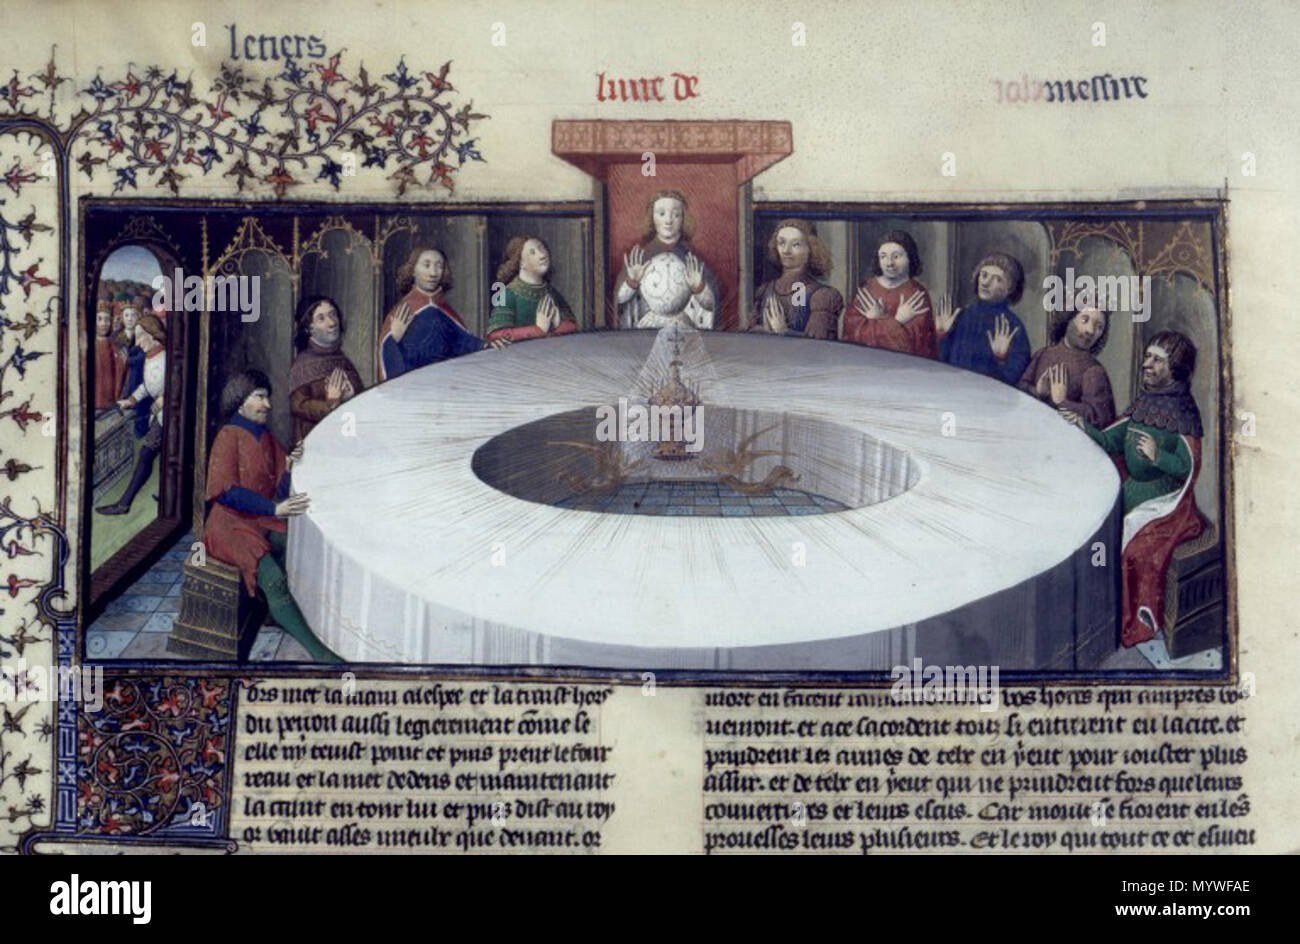 . English: King Arthur's knights, gathered at the Round Table to celebrate the Pentecost, see a vision of the Holy Grail. The Grail appears as a veiled ciborium, made of gold and decorated with jewels, held by two angels. From a manuscript of Lancelot and the Holy Grail.  . circa 1405-1407. Attributed to Maître des cleres femmes. 373 Apparition saint graal Stock Photo